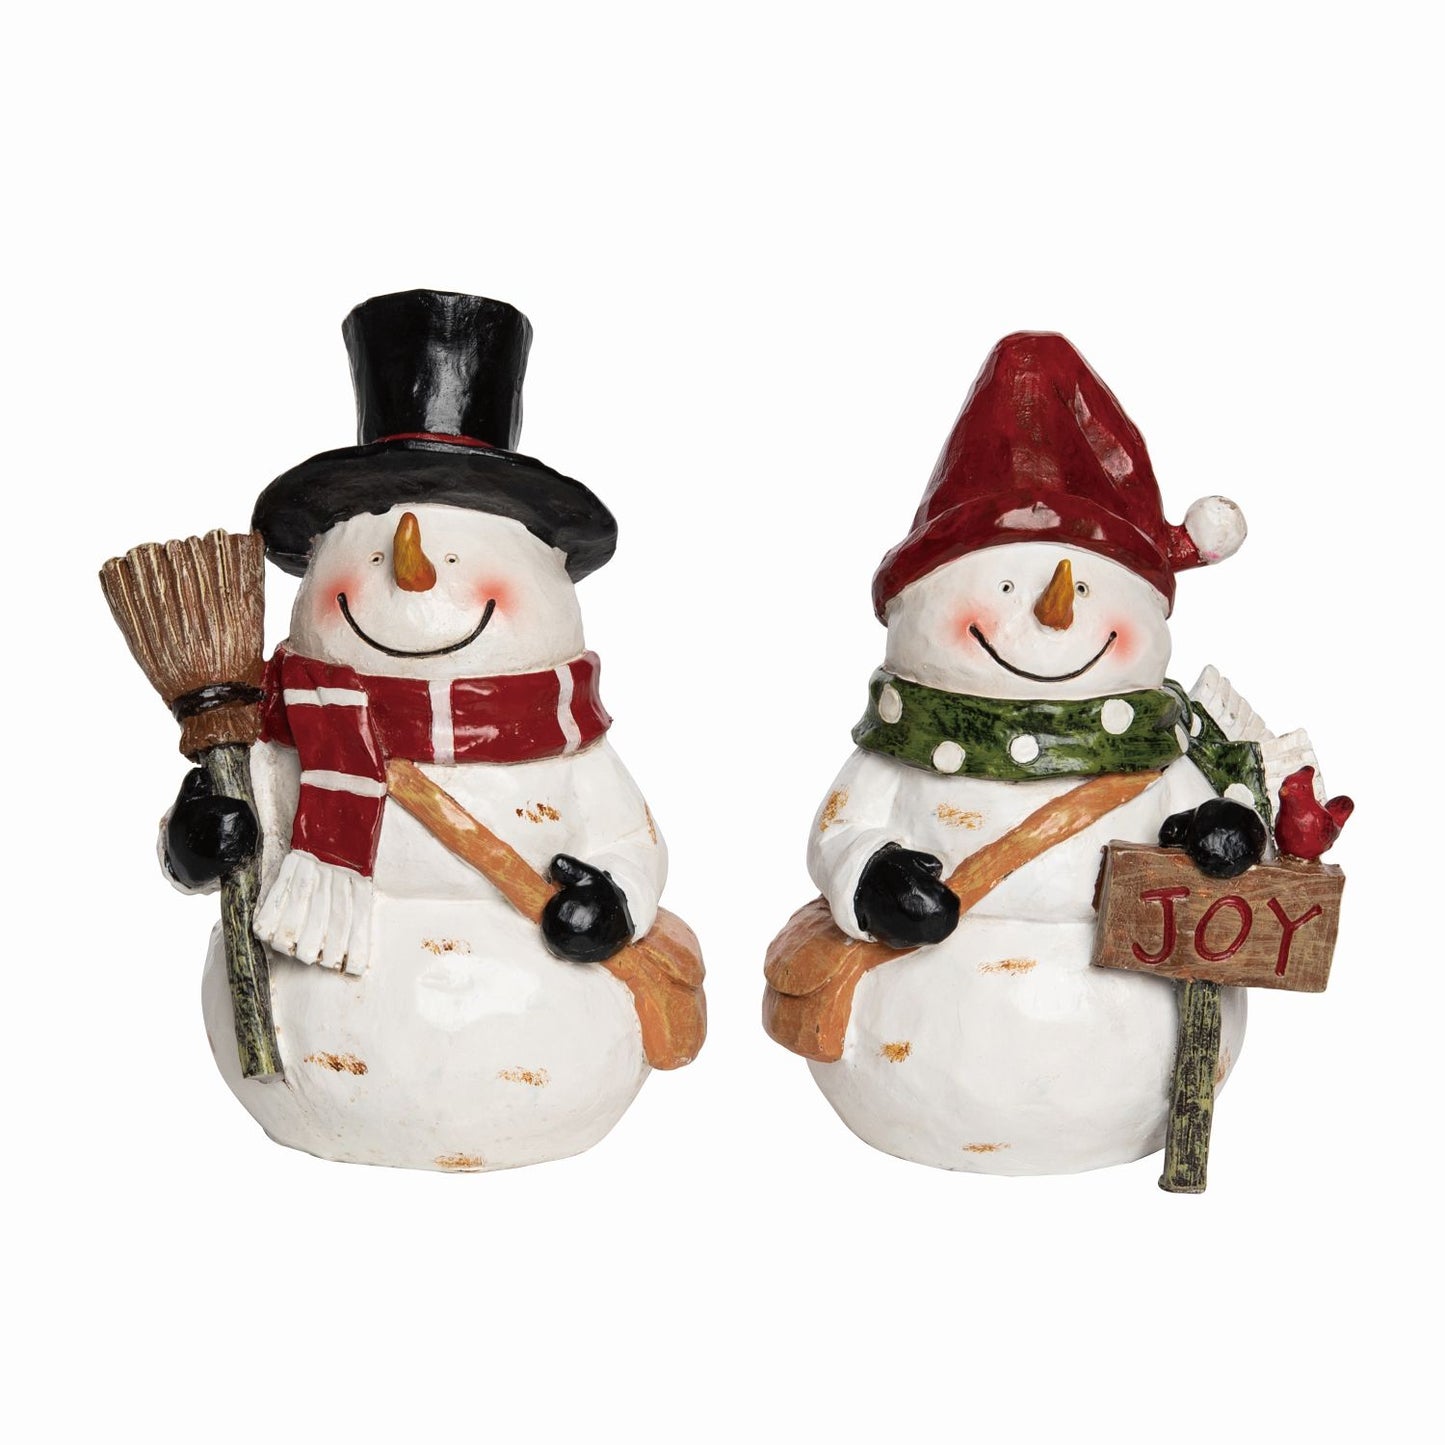 Transpac Small Carved Snowman Figurine, Set Of 2, Assortment